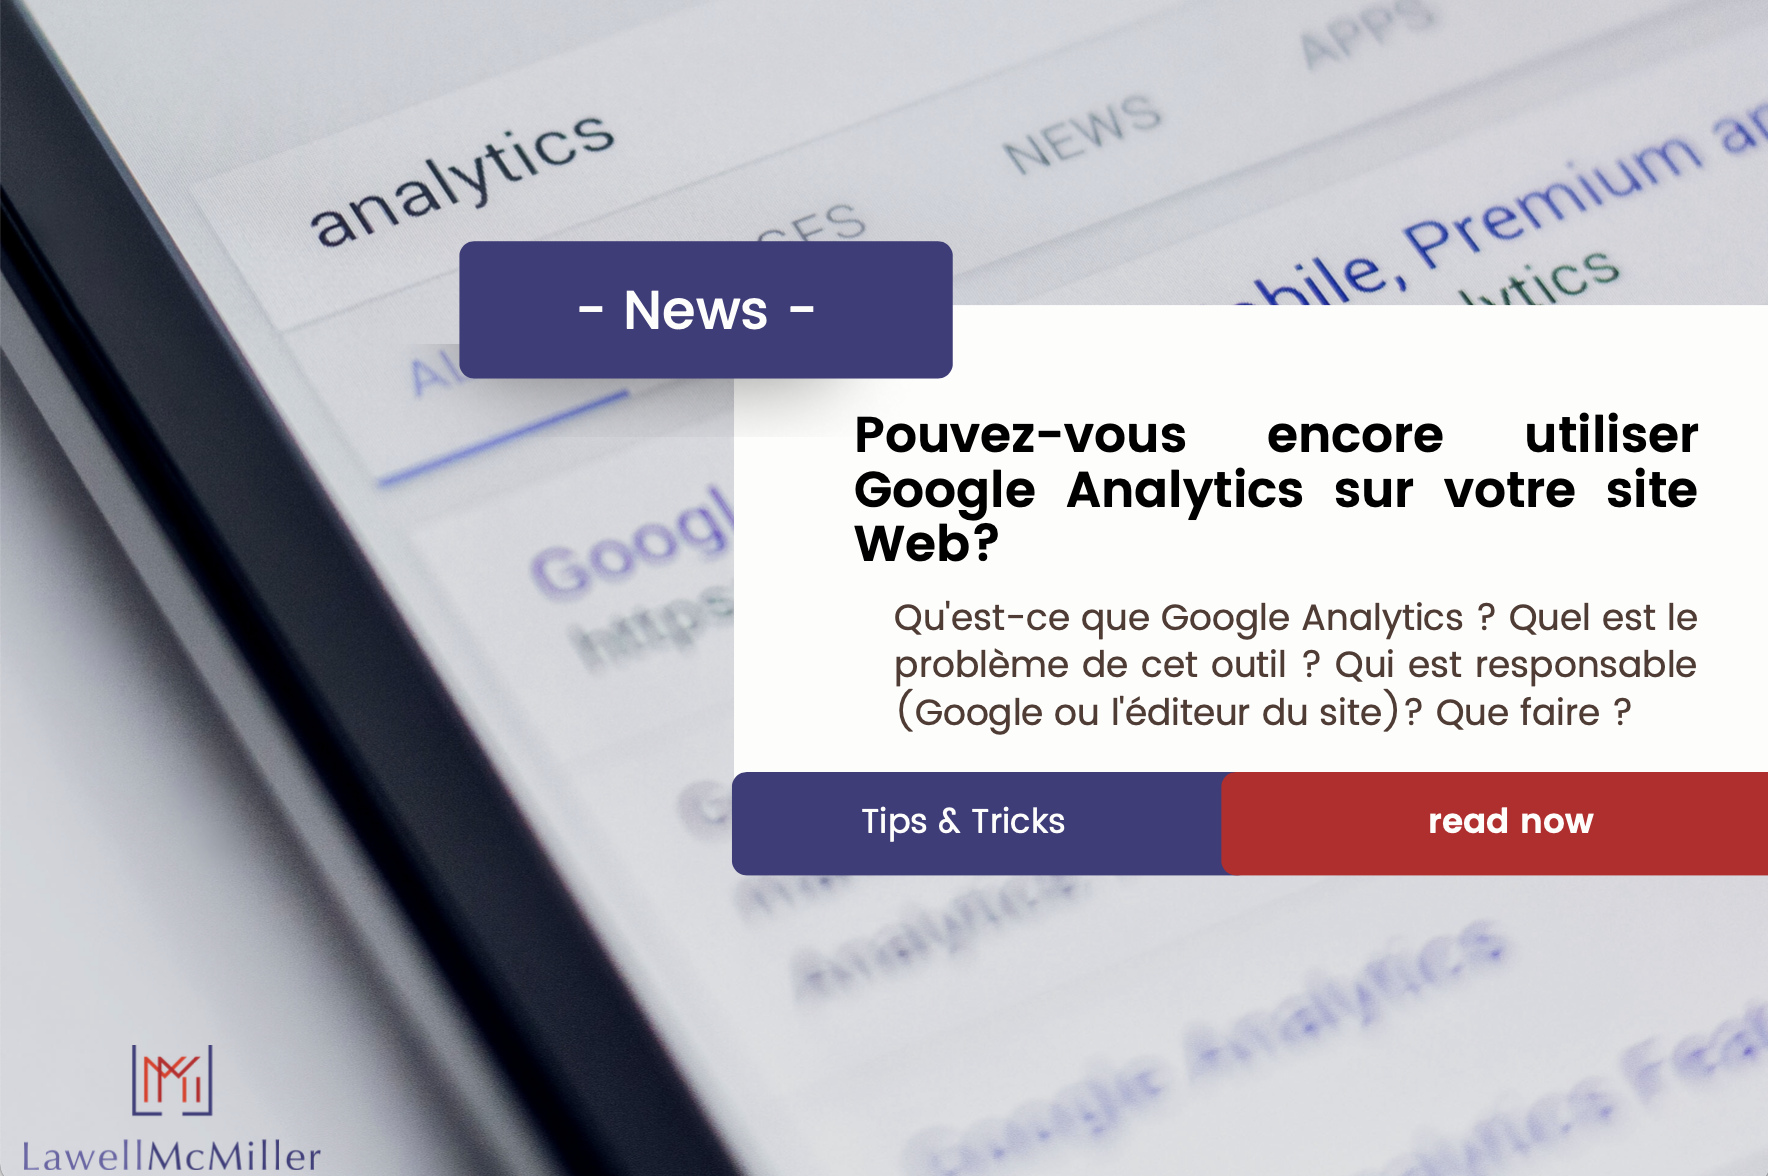 Are you still entitled to use Google Analytics on your website?